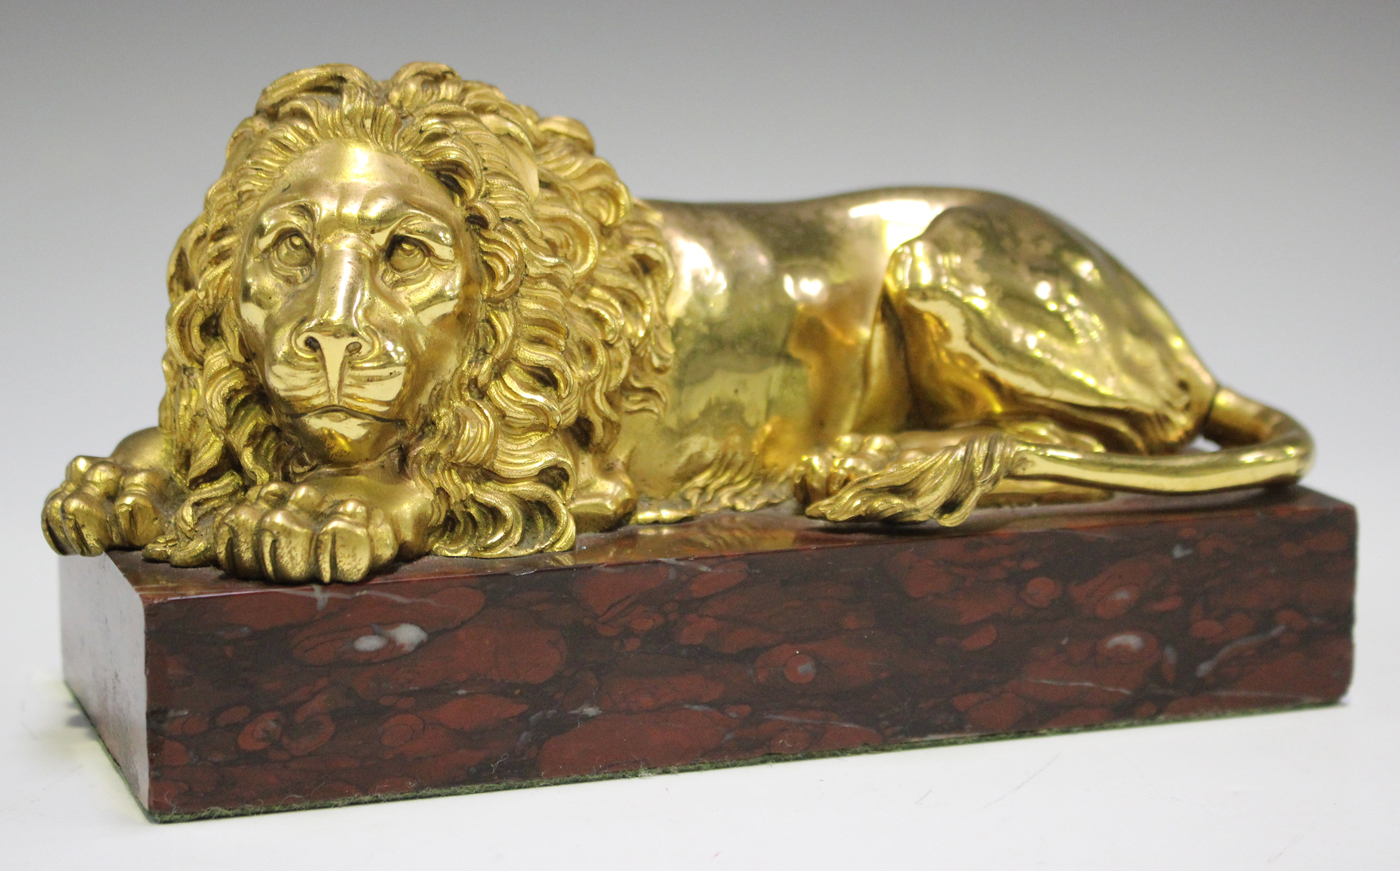 A late 19th/early 20th century gilded cast bronze model of a recumbent lion, on a rose marble